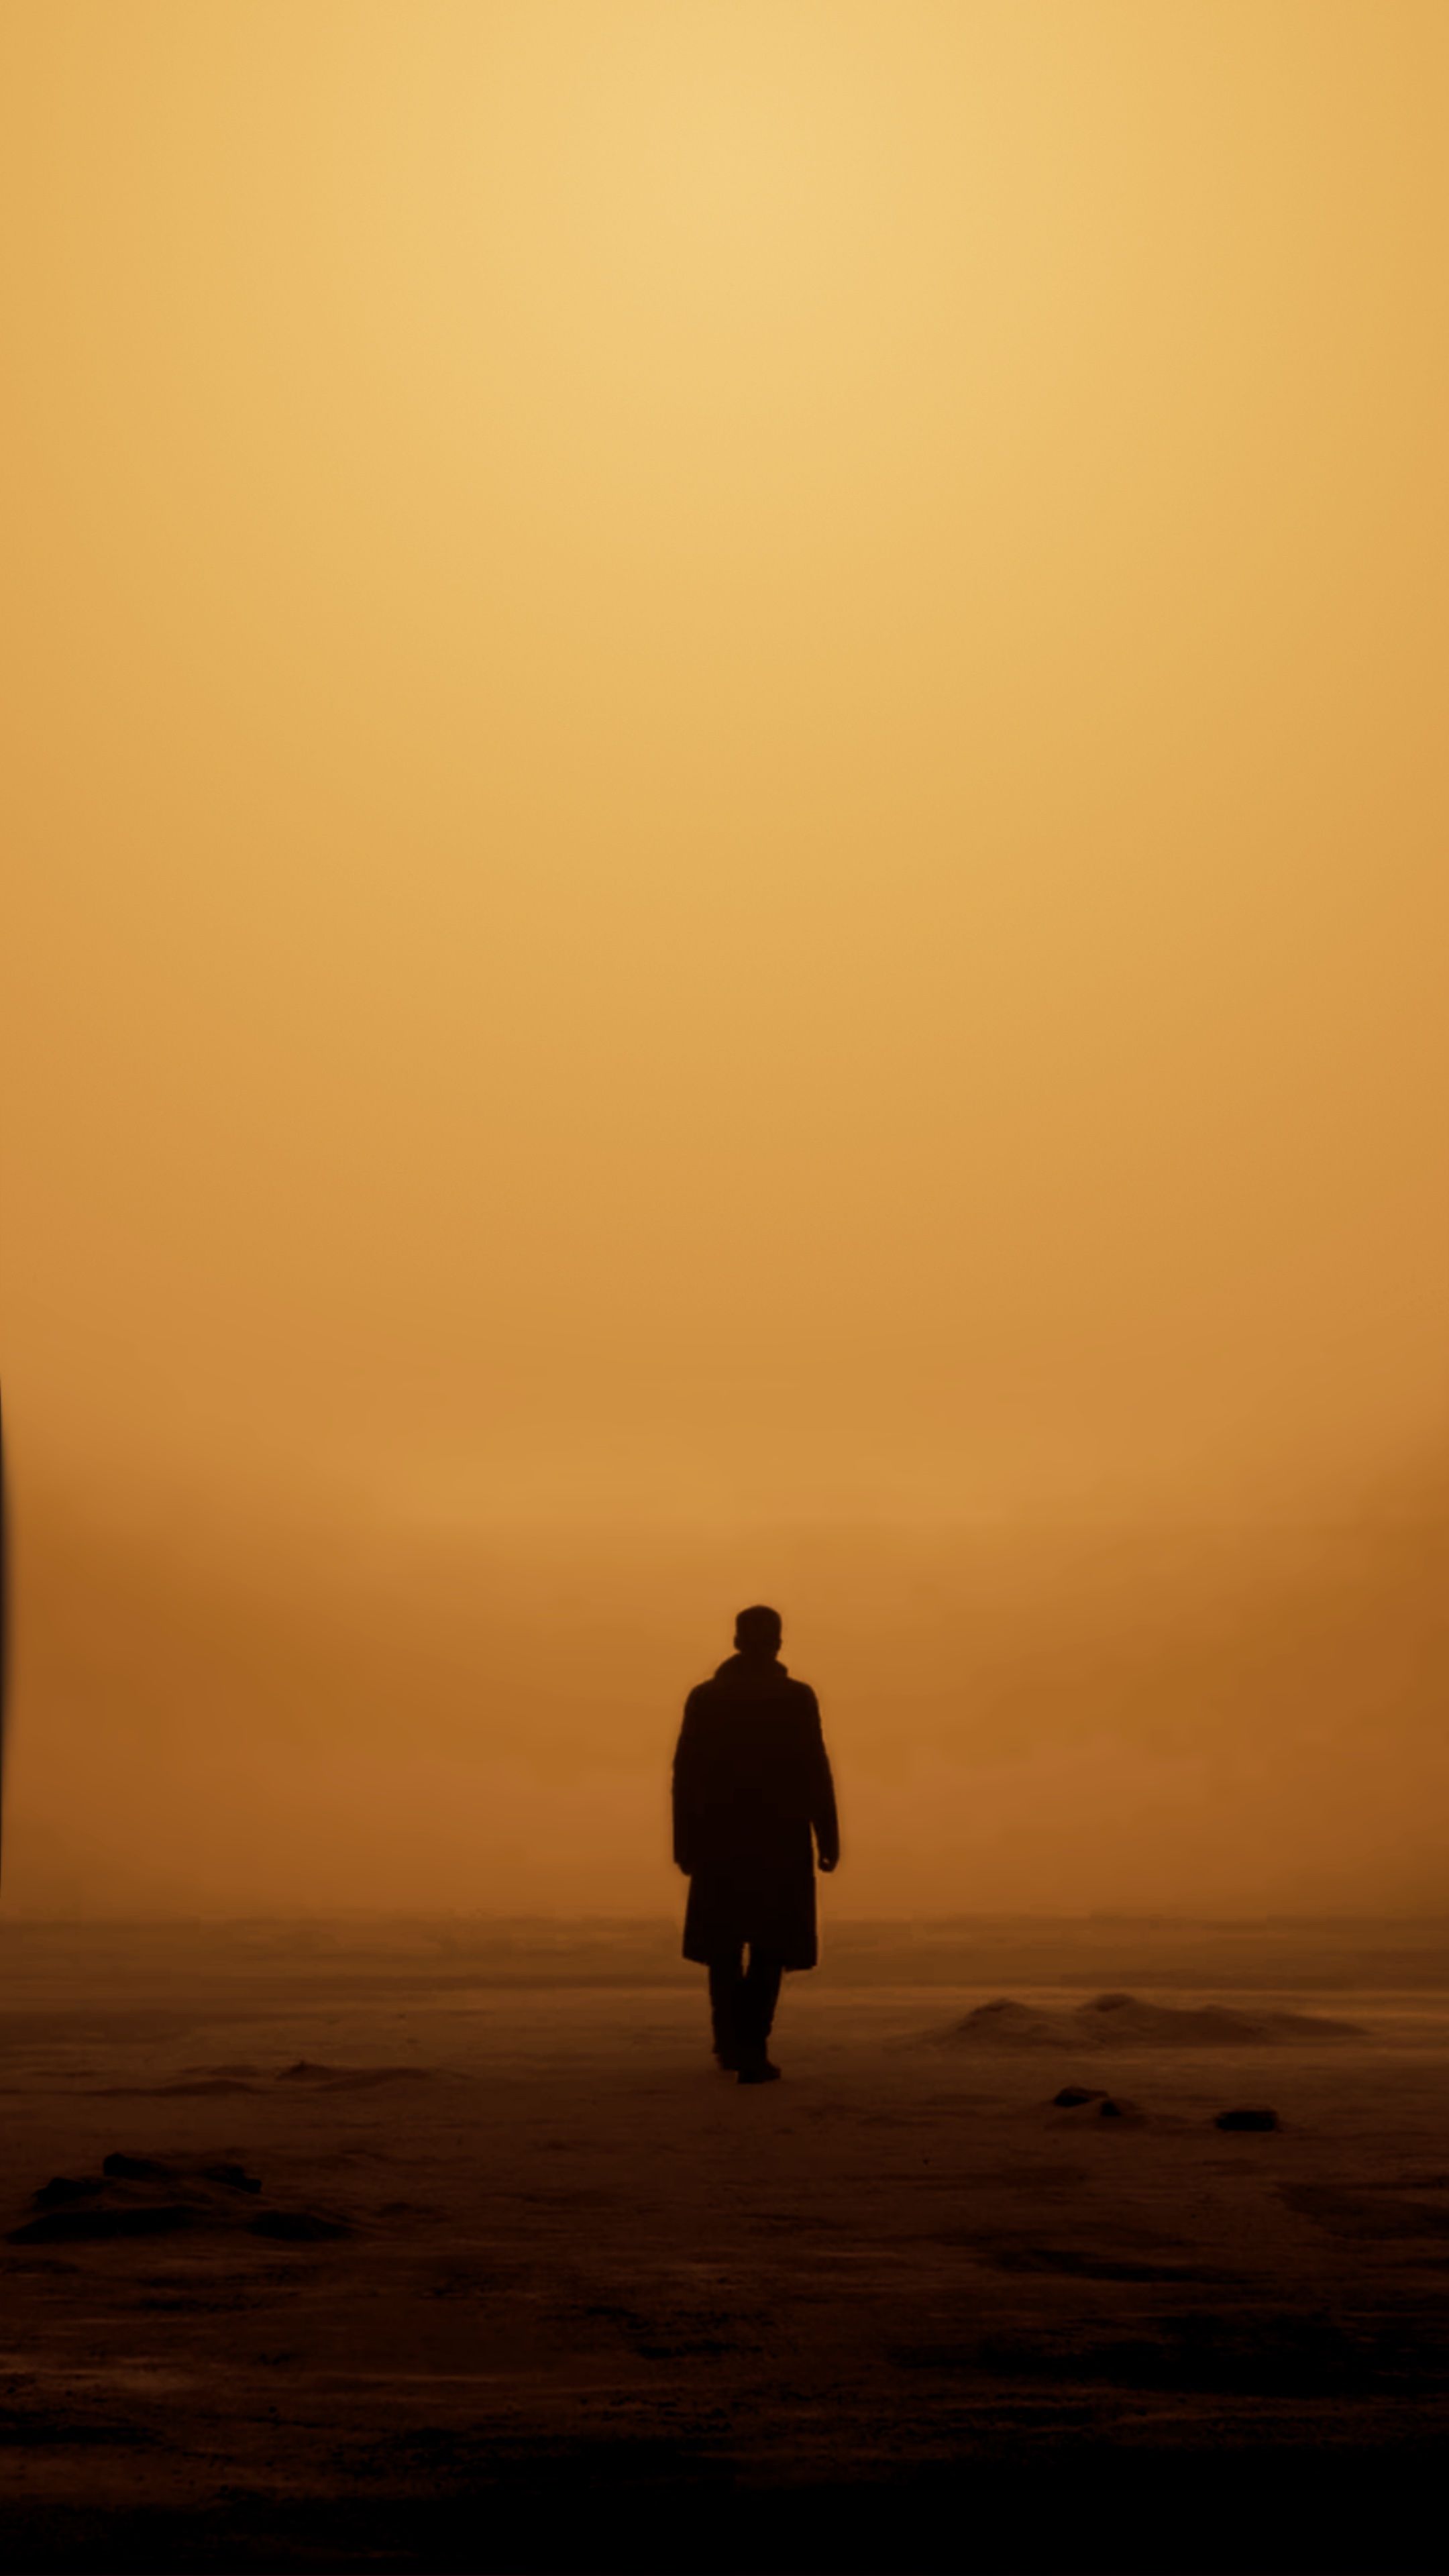 Blade Runner 2049 Wallpaper for Your iPhone and iPad